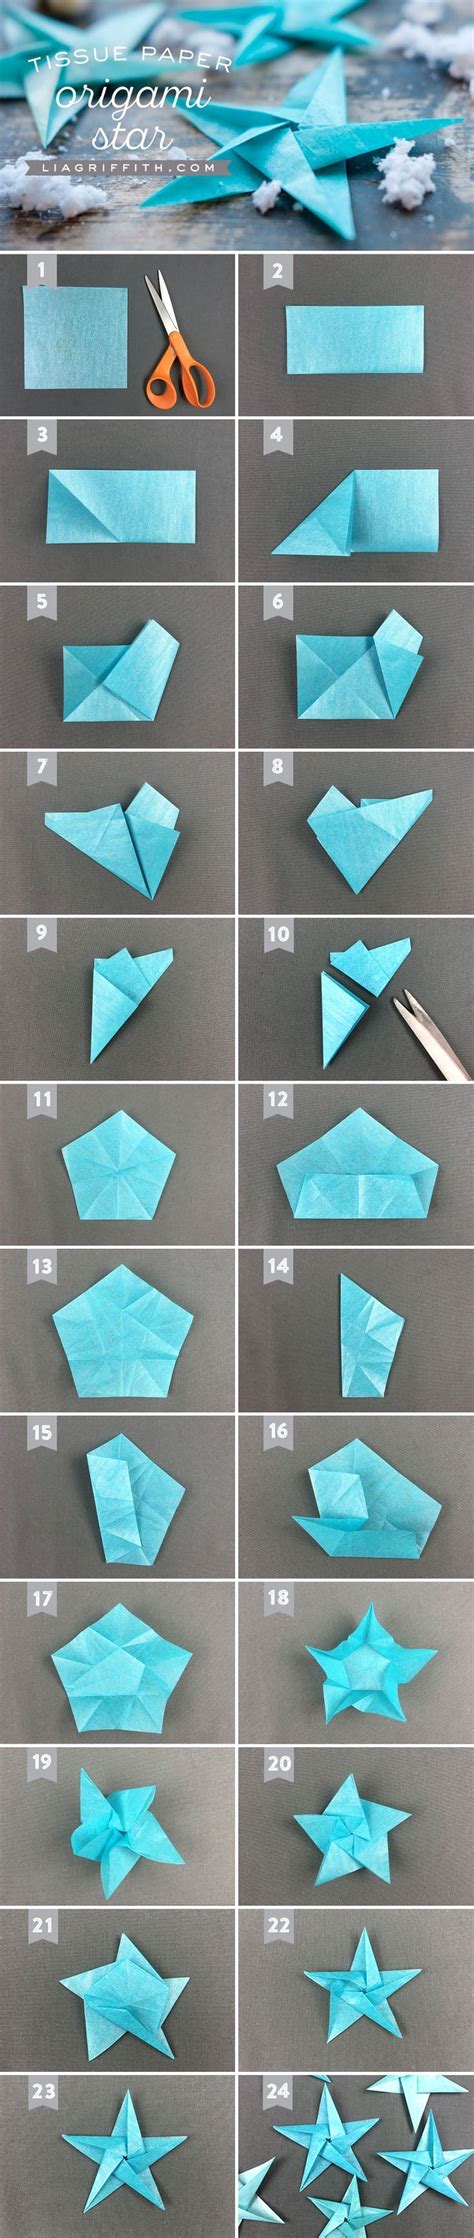 How To Make Origami Paper Stars Easy Step By Step Best Games Walkthrough